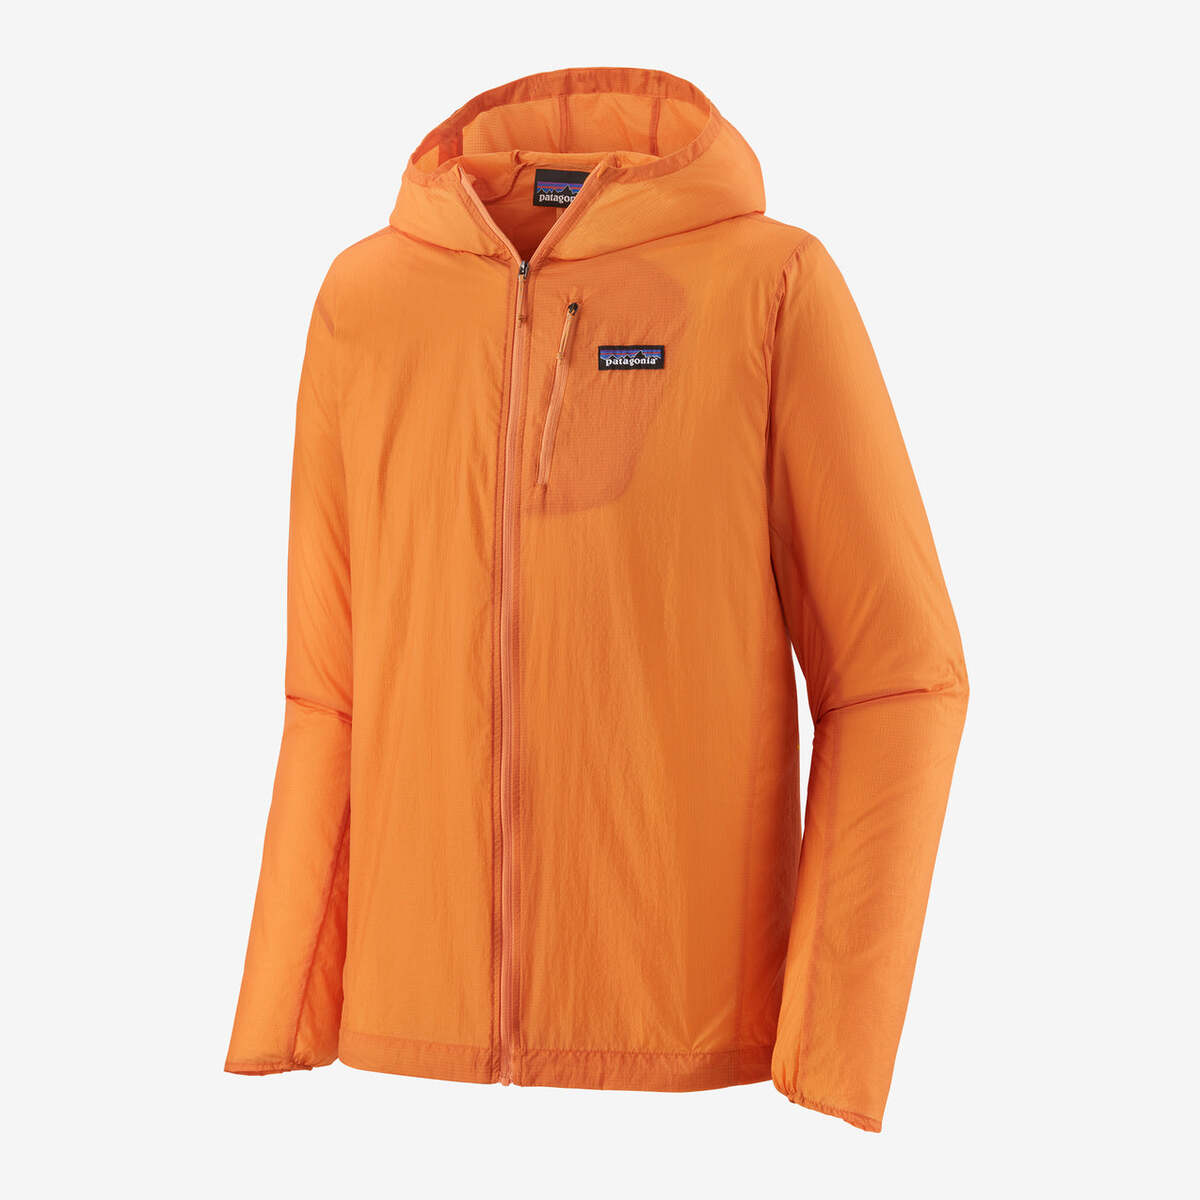 patagonia メンズ フーディニ ジャケット パタゴニア #24142 Lose Yourself Outline: Pumice / XS